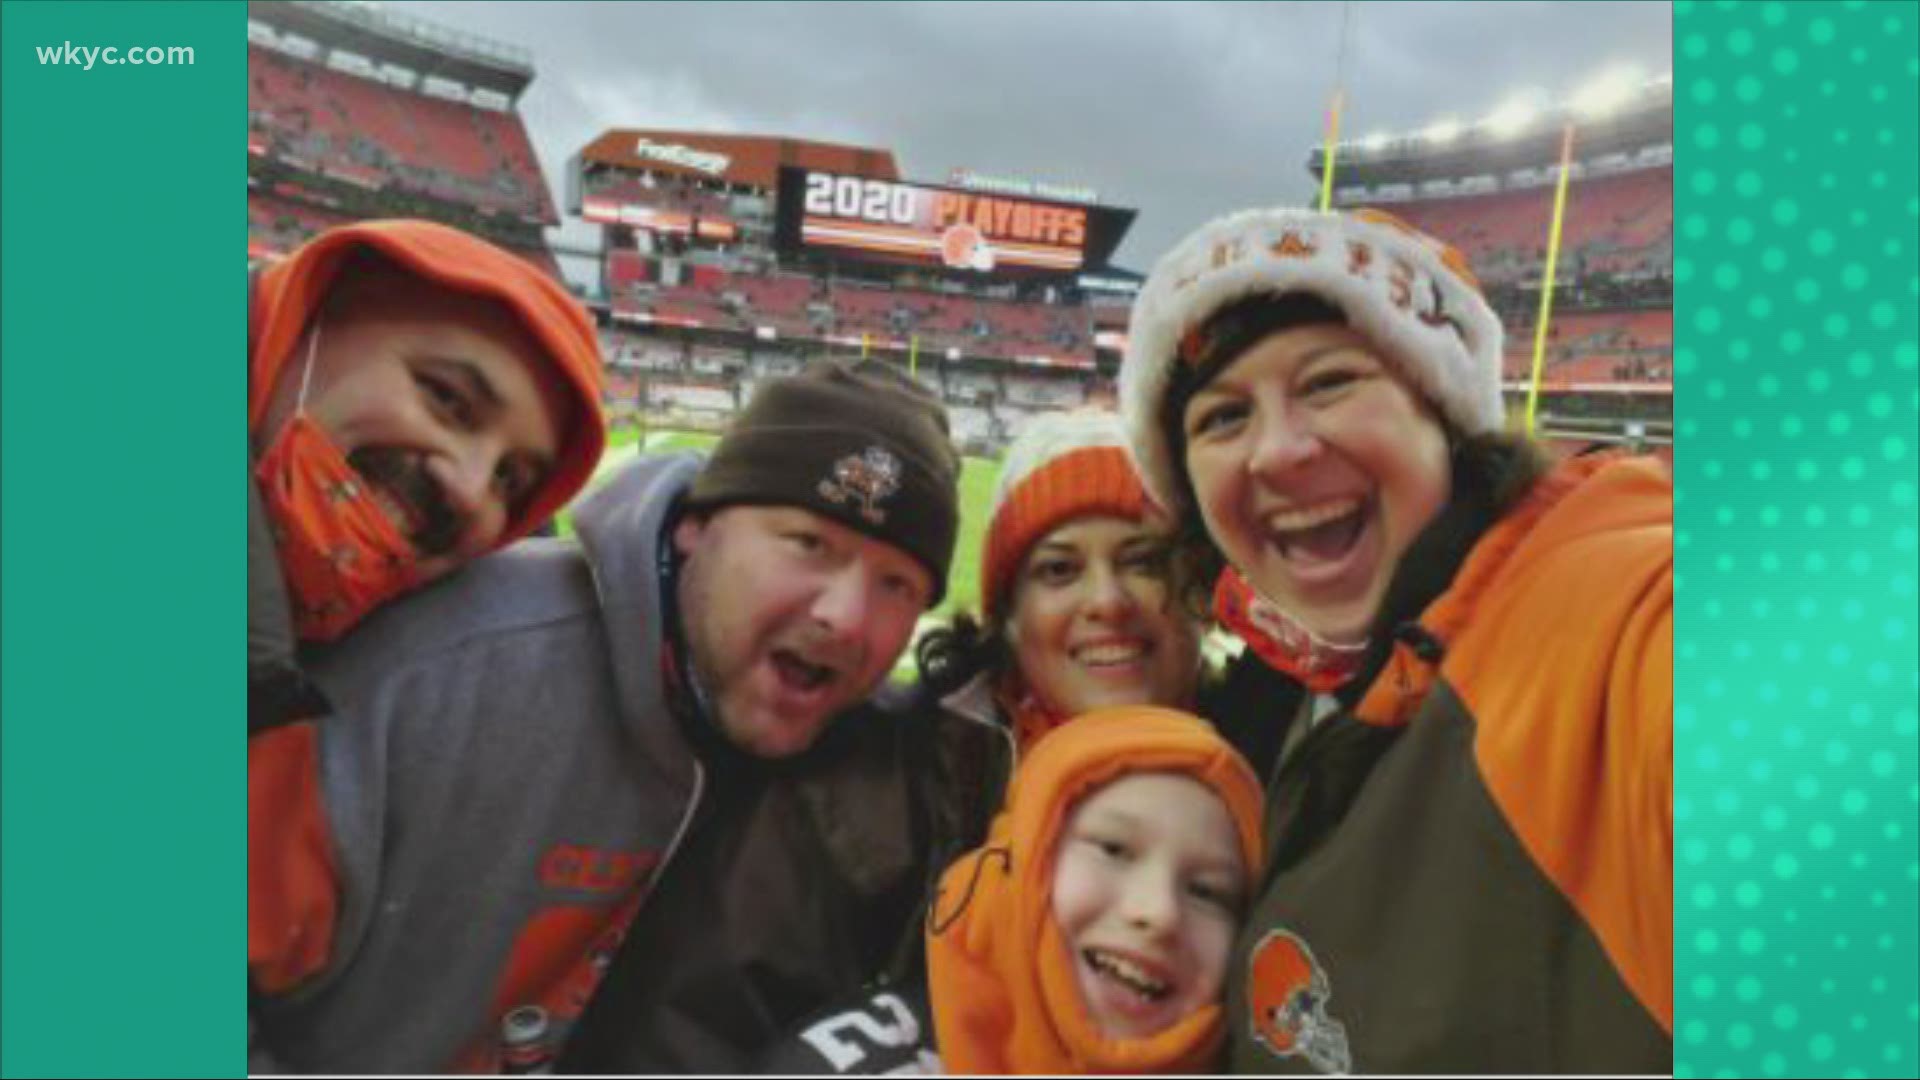 Get pumped, Dawg Pound! We are so excited about the Cleveland Browns making the playoffs -- and we know you are, too!